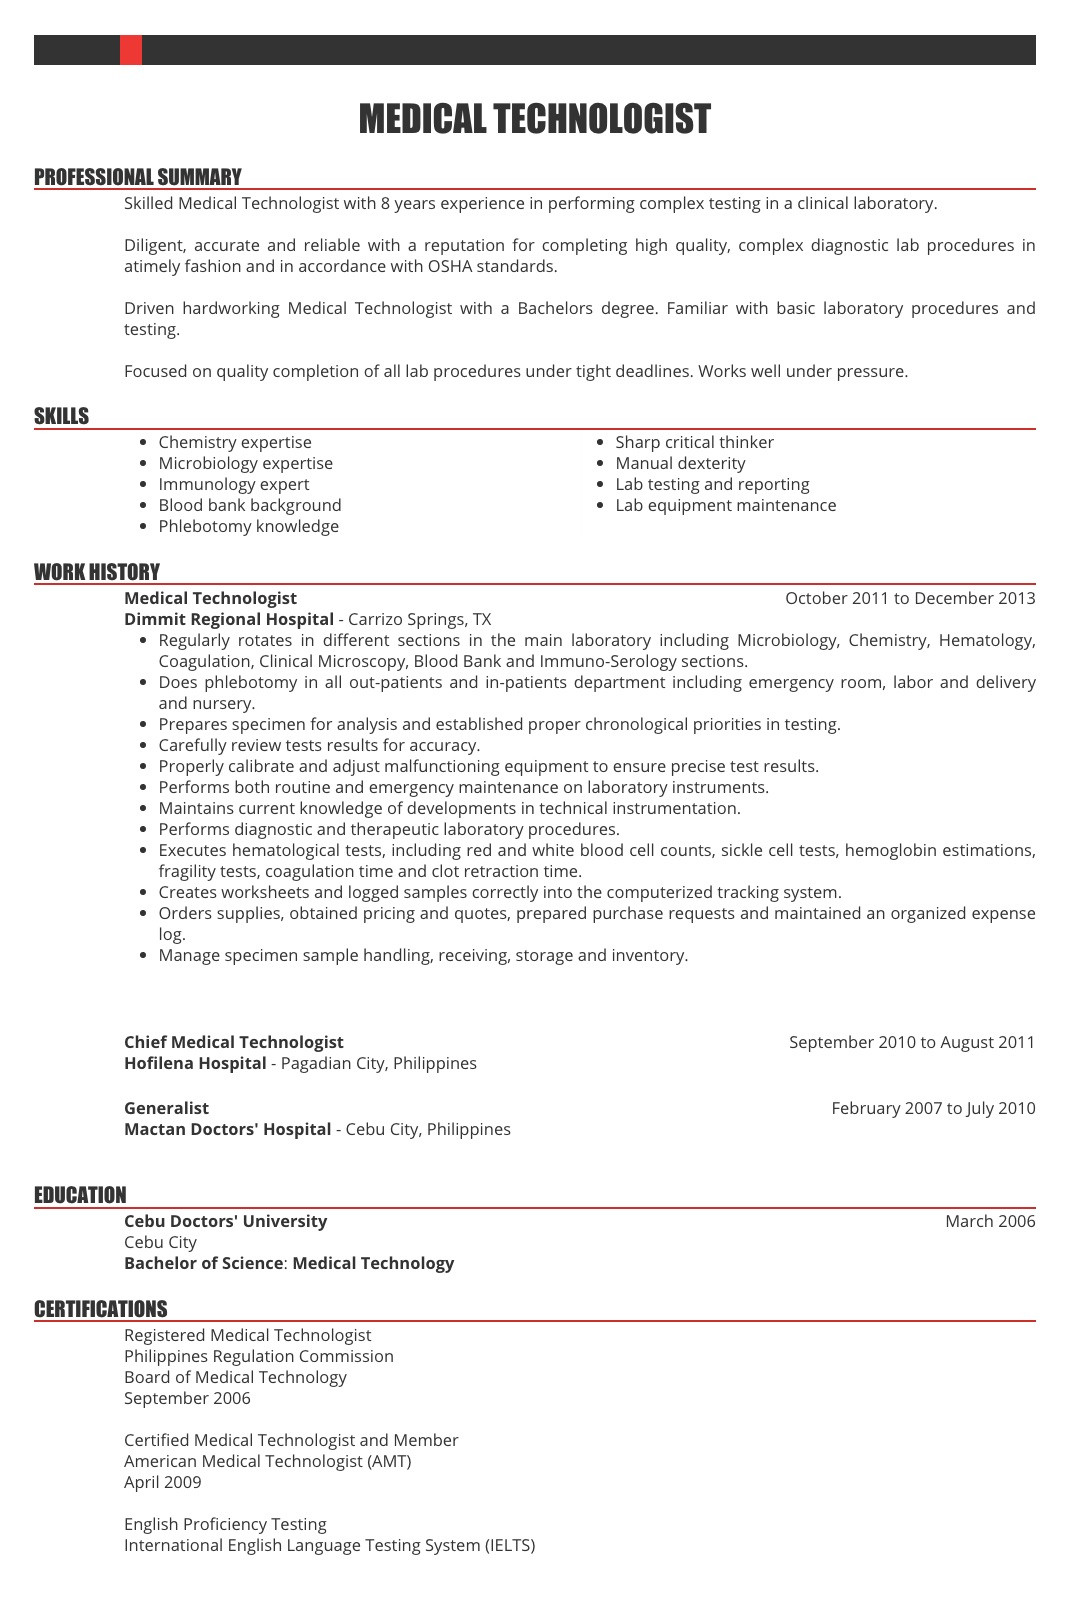 Sample Resume Of Medical Technologist Philippines Resume Samples for Healthcare Workers In the Philippines â Filipiknow